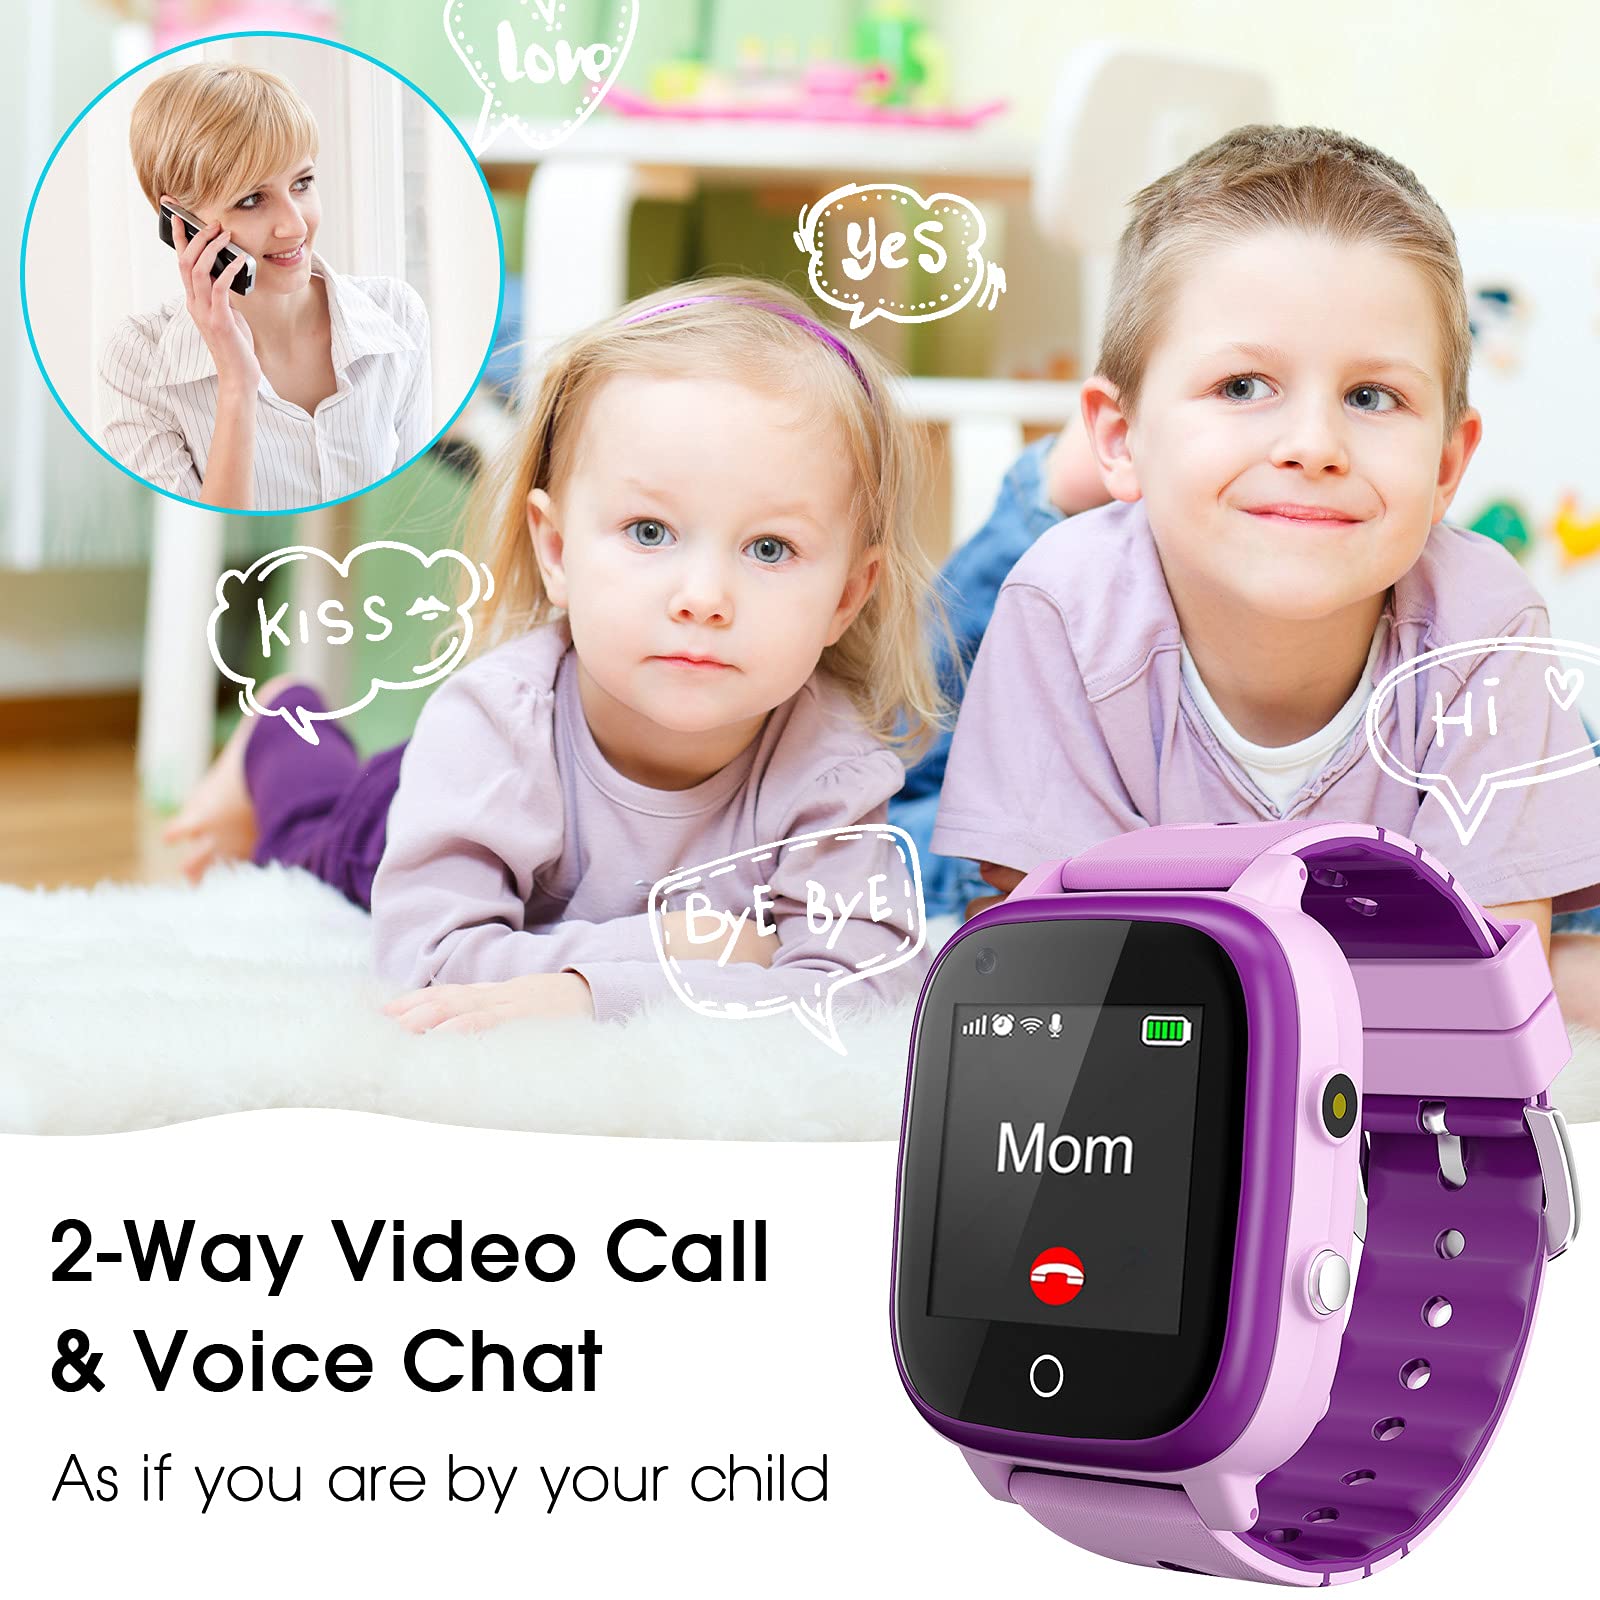 cjc 4G Kids Smart Watch with GPS Tracker and Calling, 2 Way Call SOS Kids Cell Phone Watch, Touch Screen Watch,3-15 Years Boys Girls Birthday (T3 Purple)